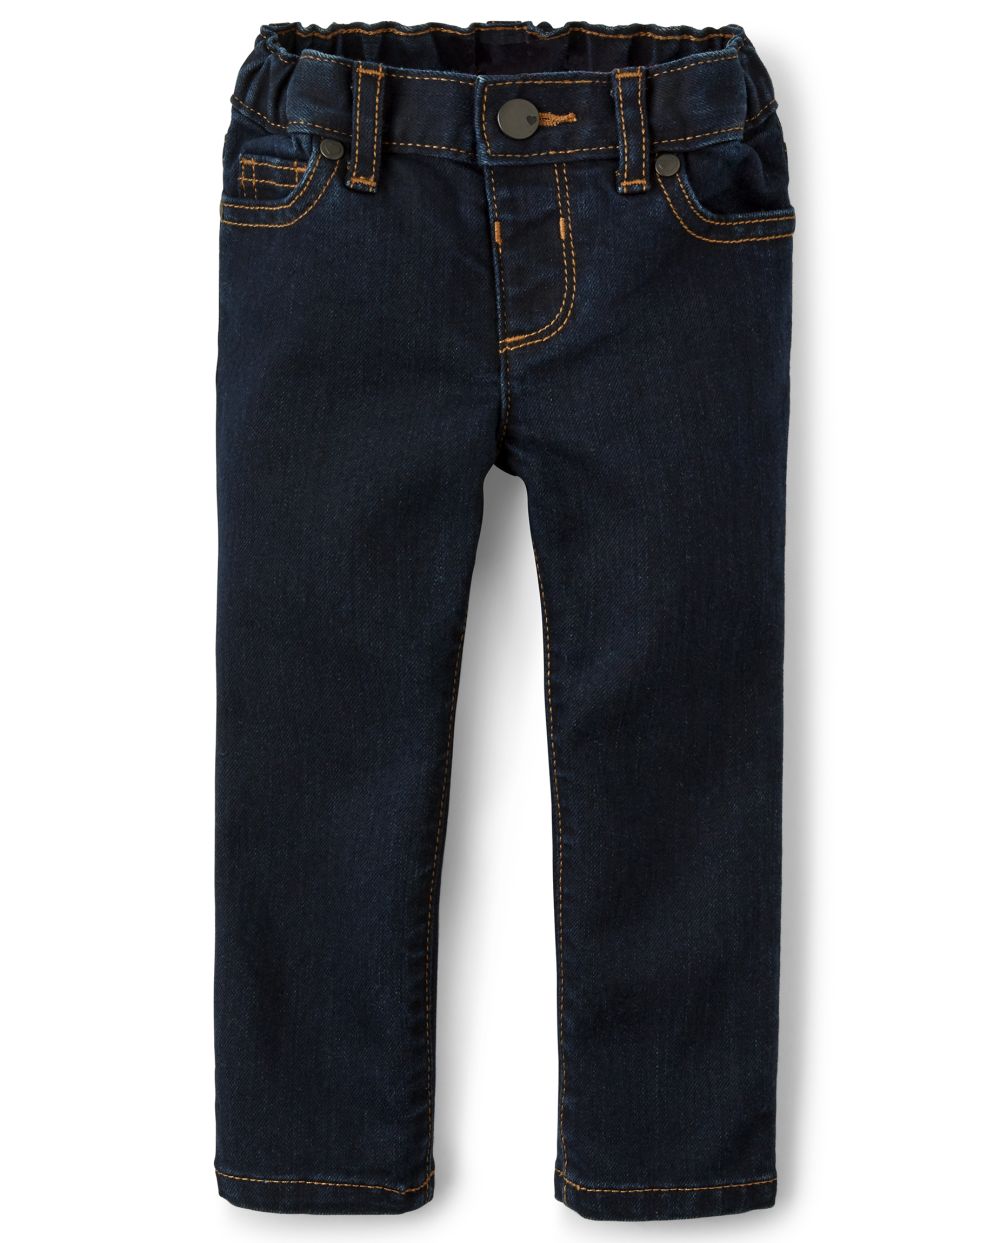 Baby And Toddler Girls Basic Super Skinny Jeans - Blueberry Wash